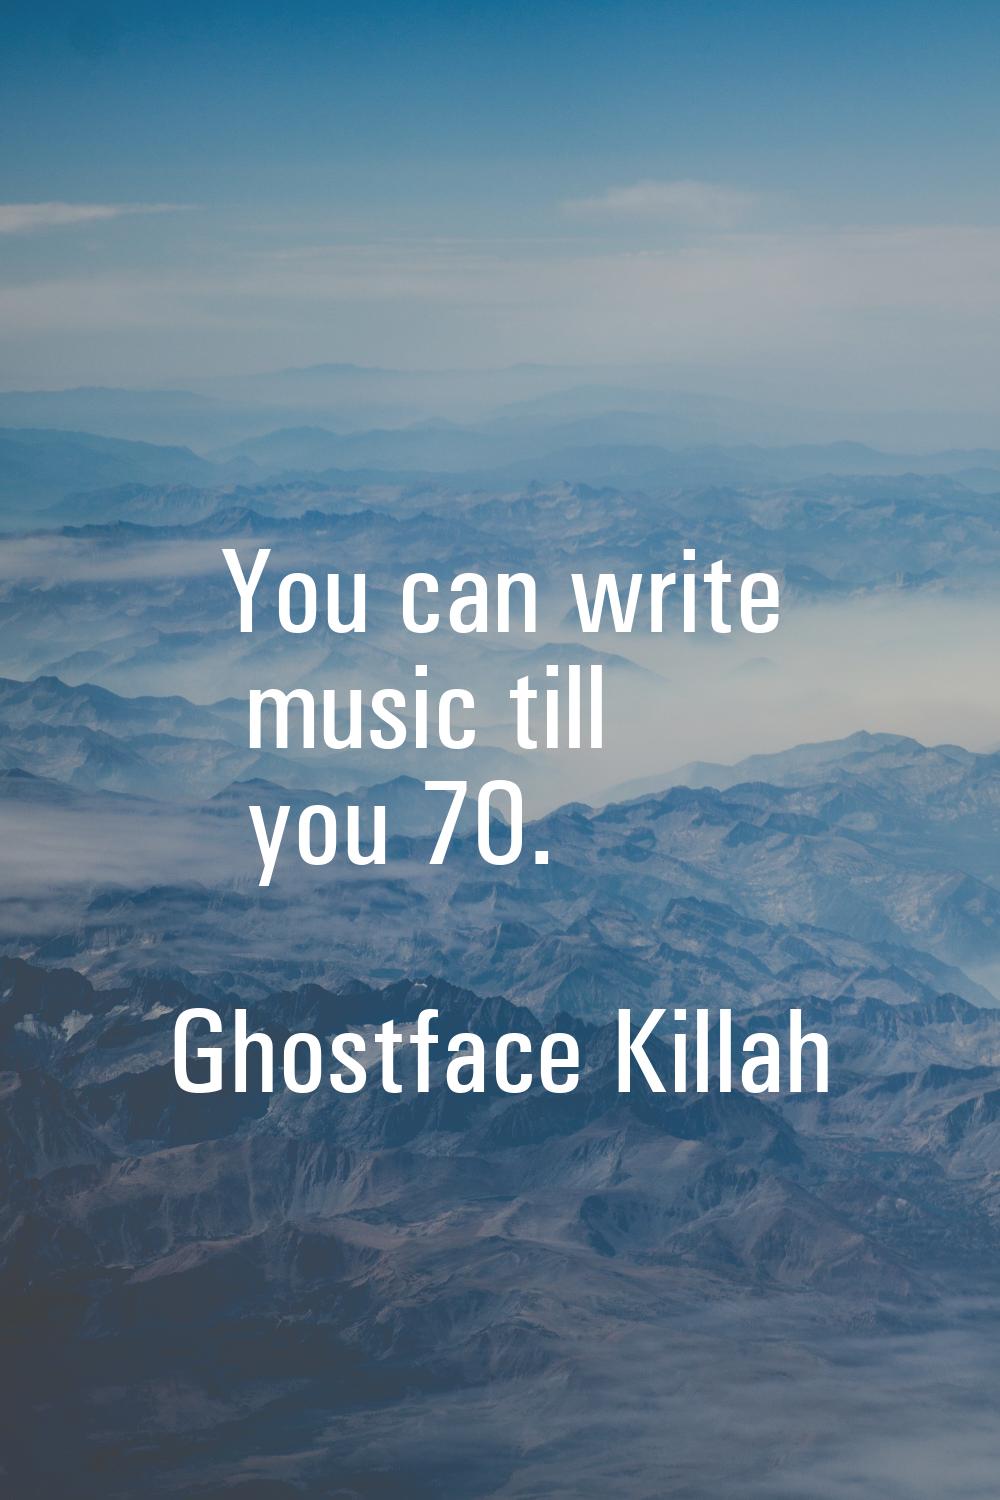 You can write music till you 70.